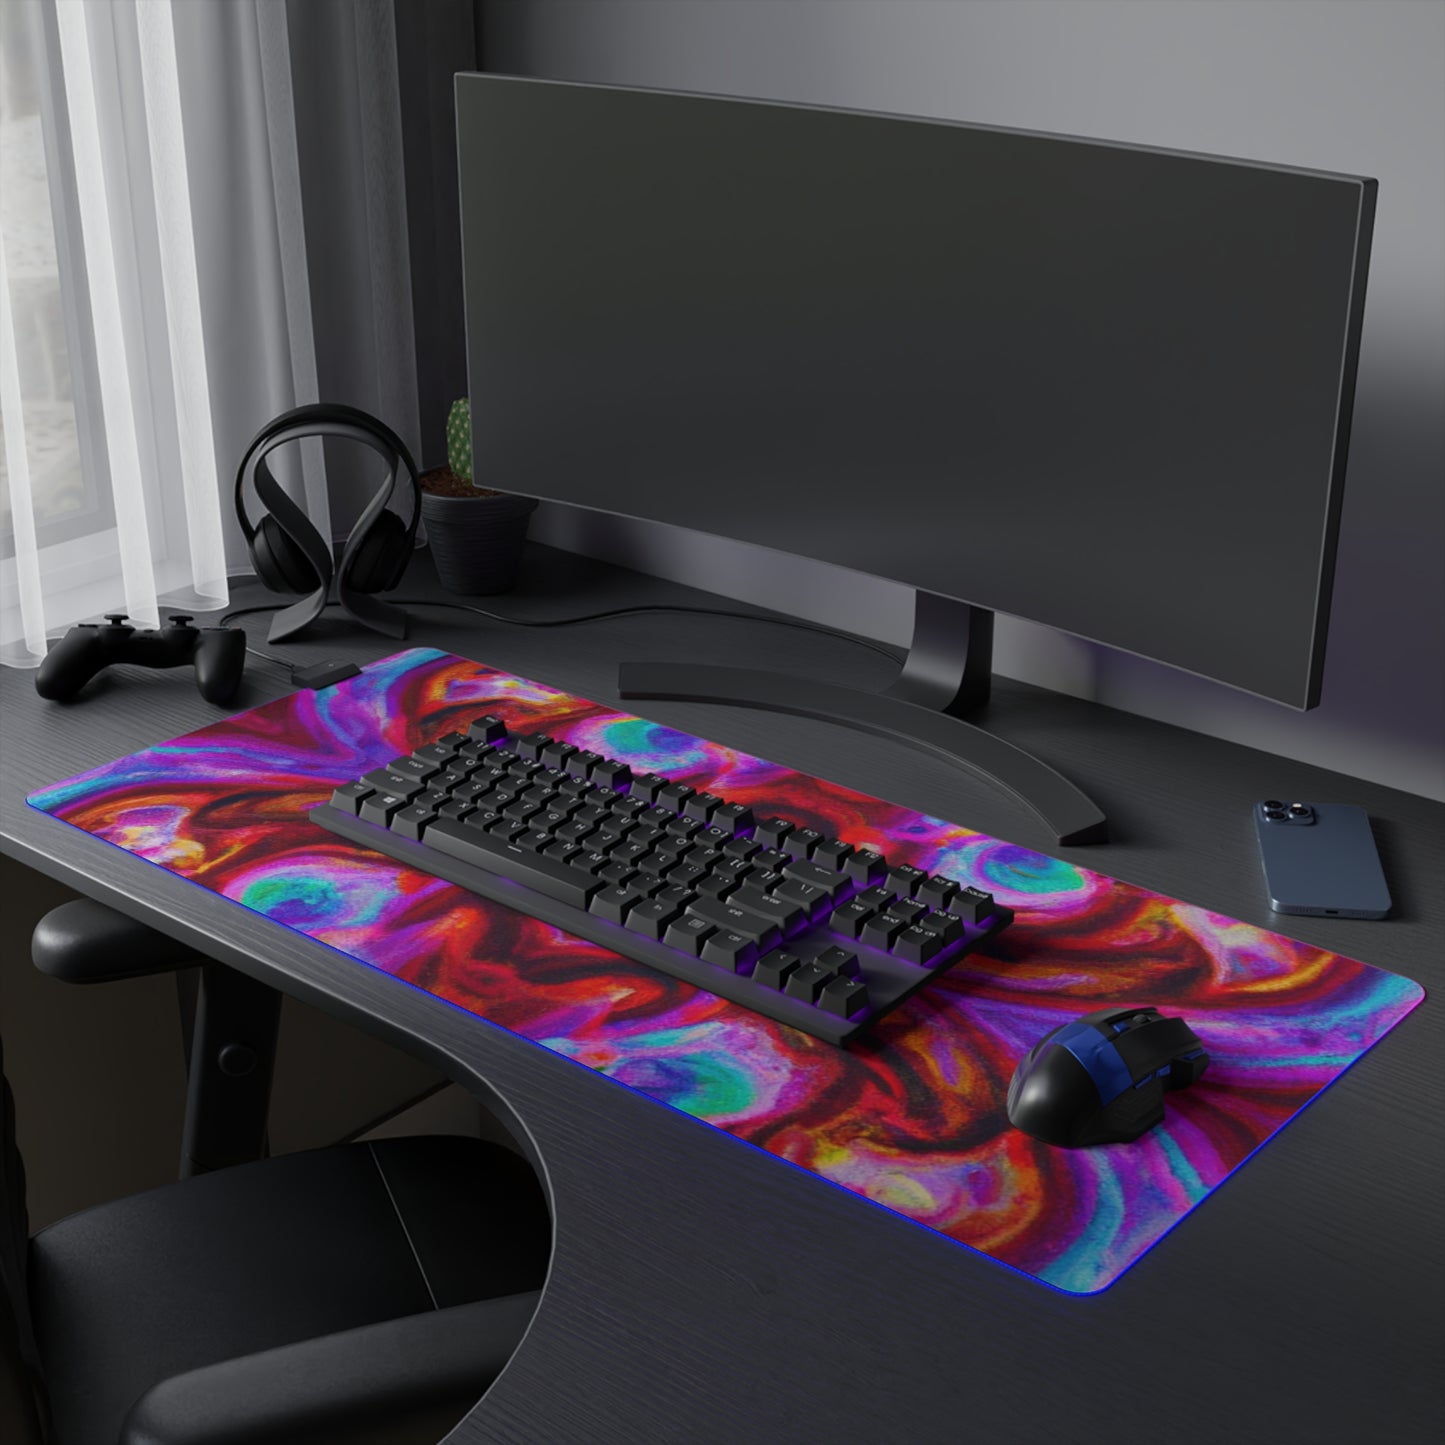 Turbo Texan - Psychedelic Trippy LED Light Up Gaming Mouse Pad